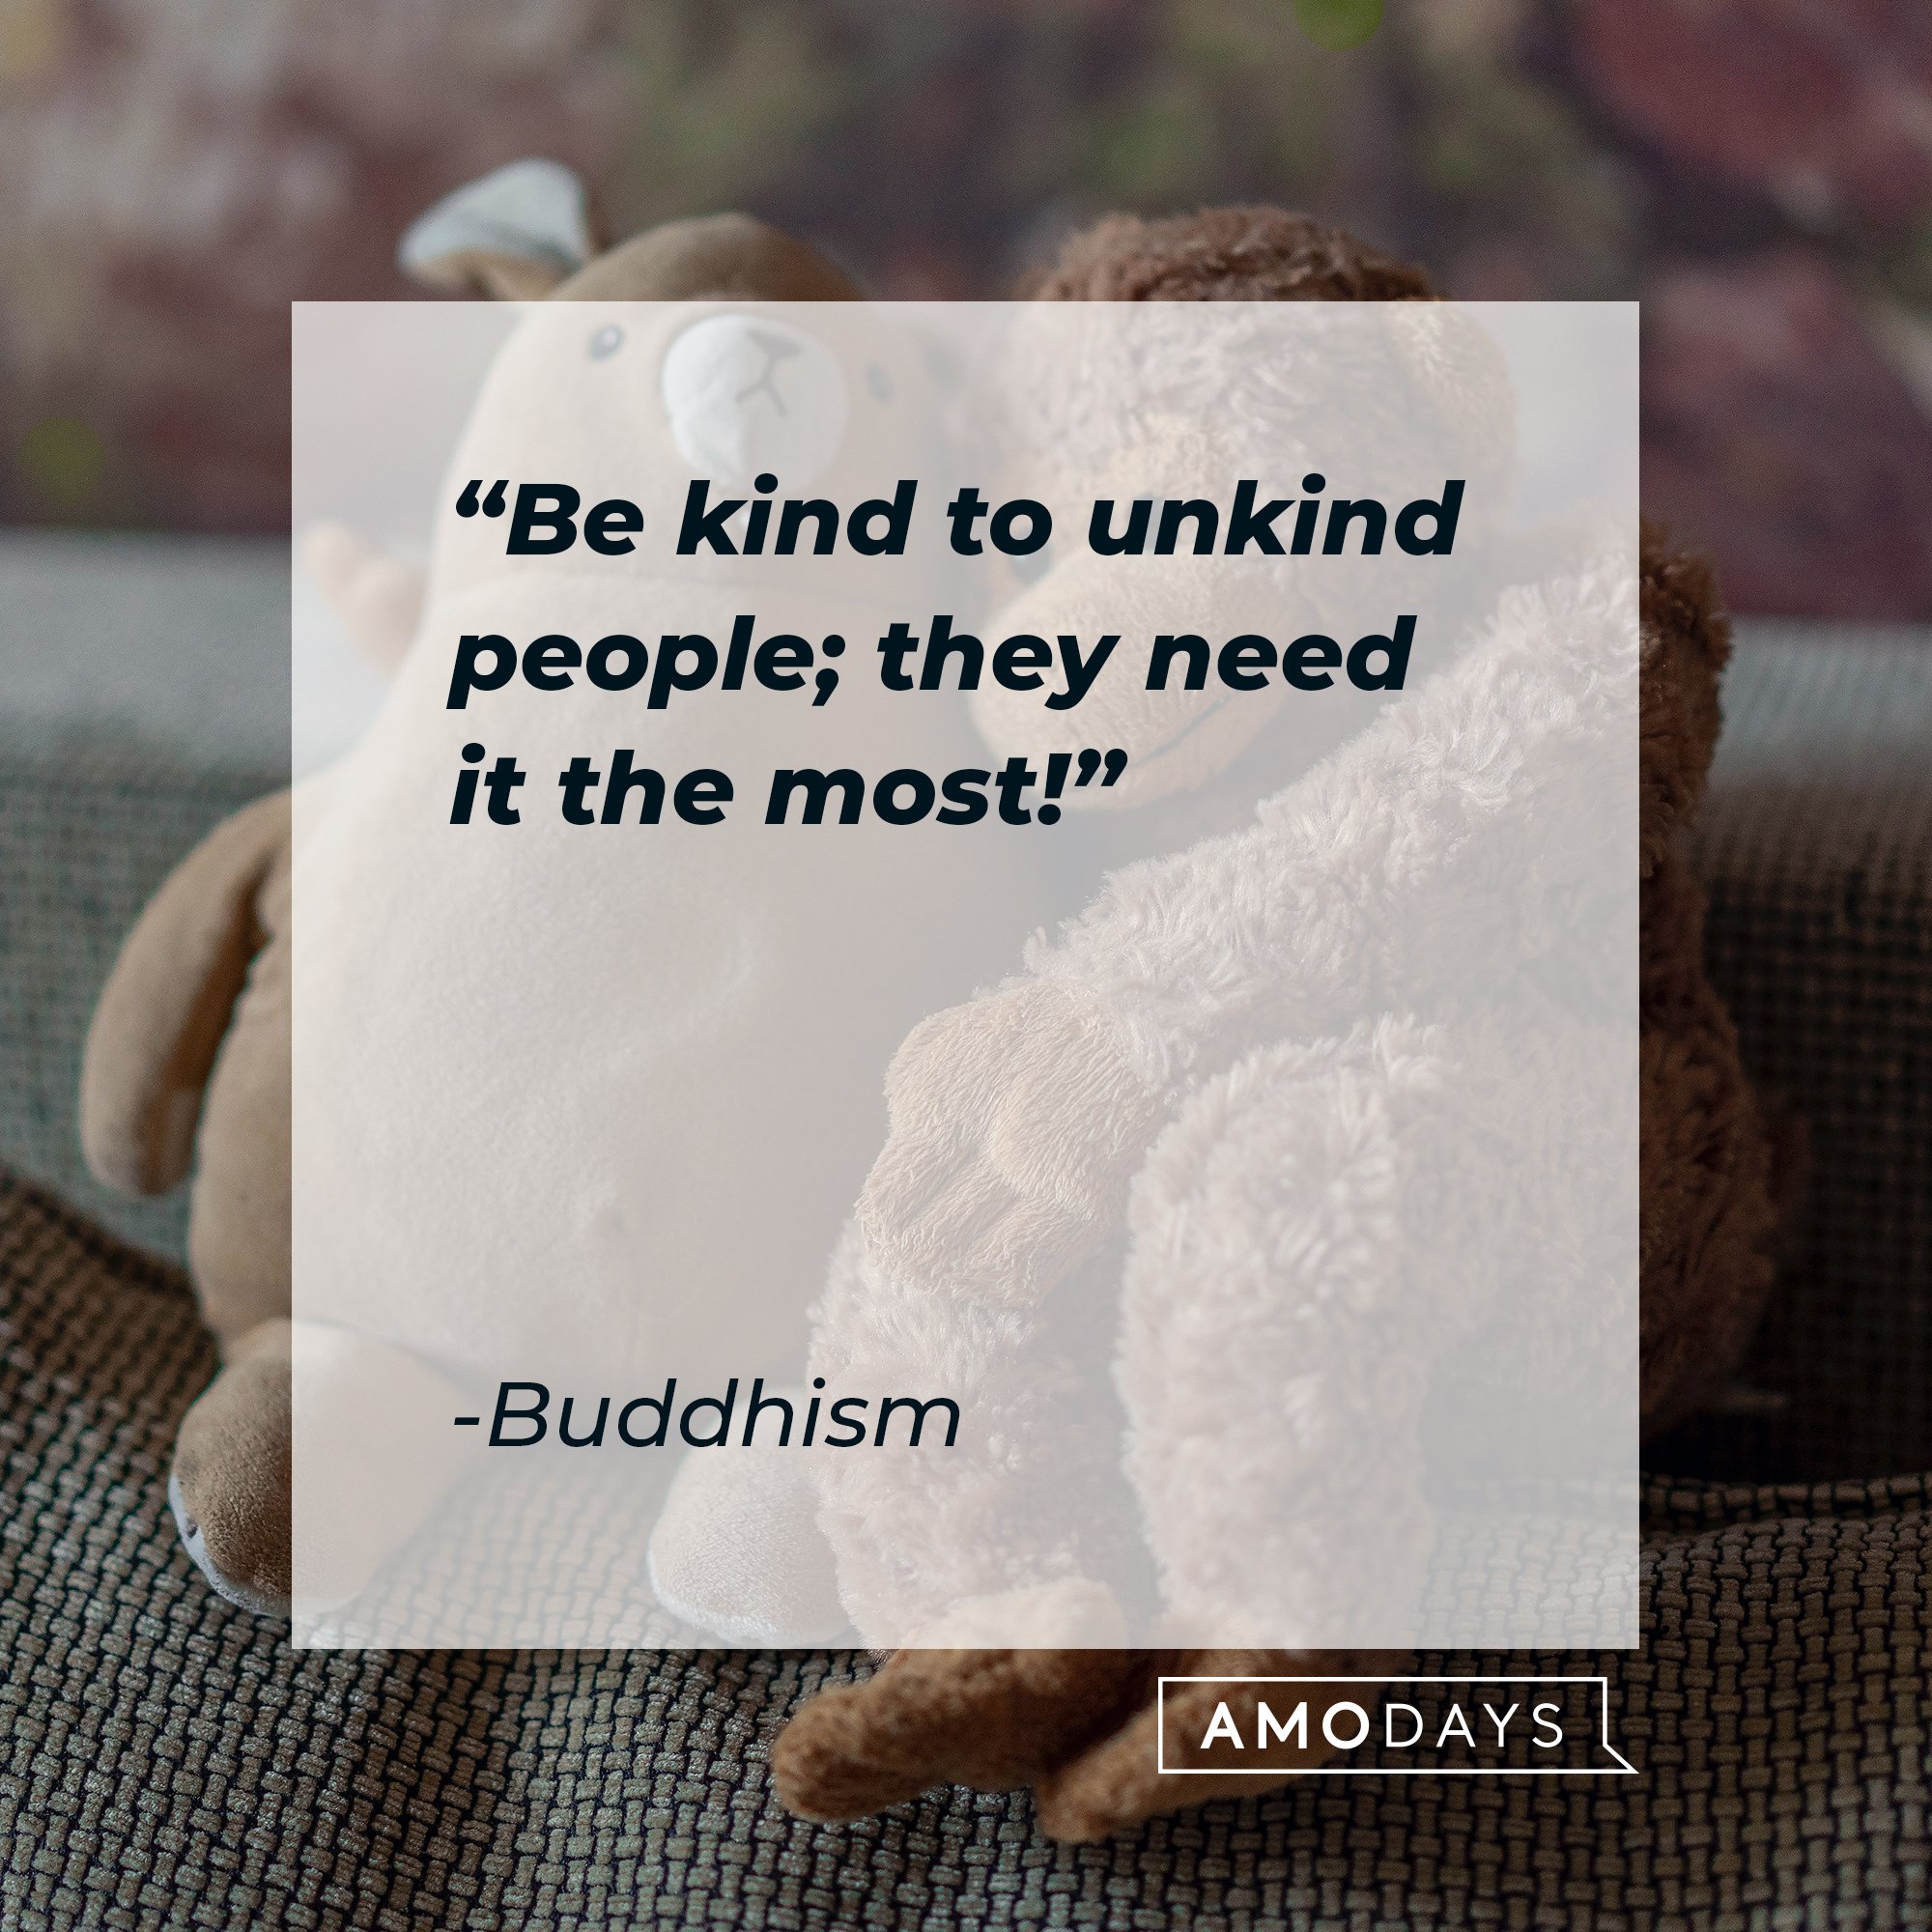 Buddhism's quote: "Be kind to unkind people; they need it the most!" | Image: AmoDays